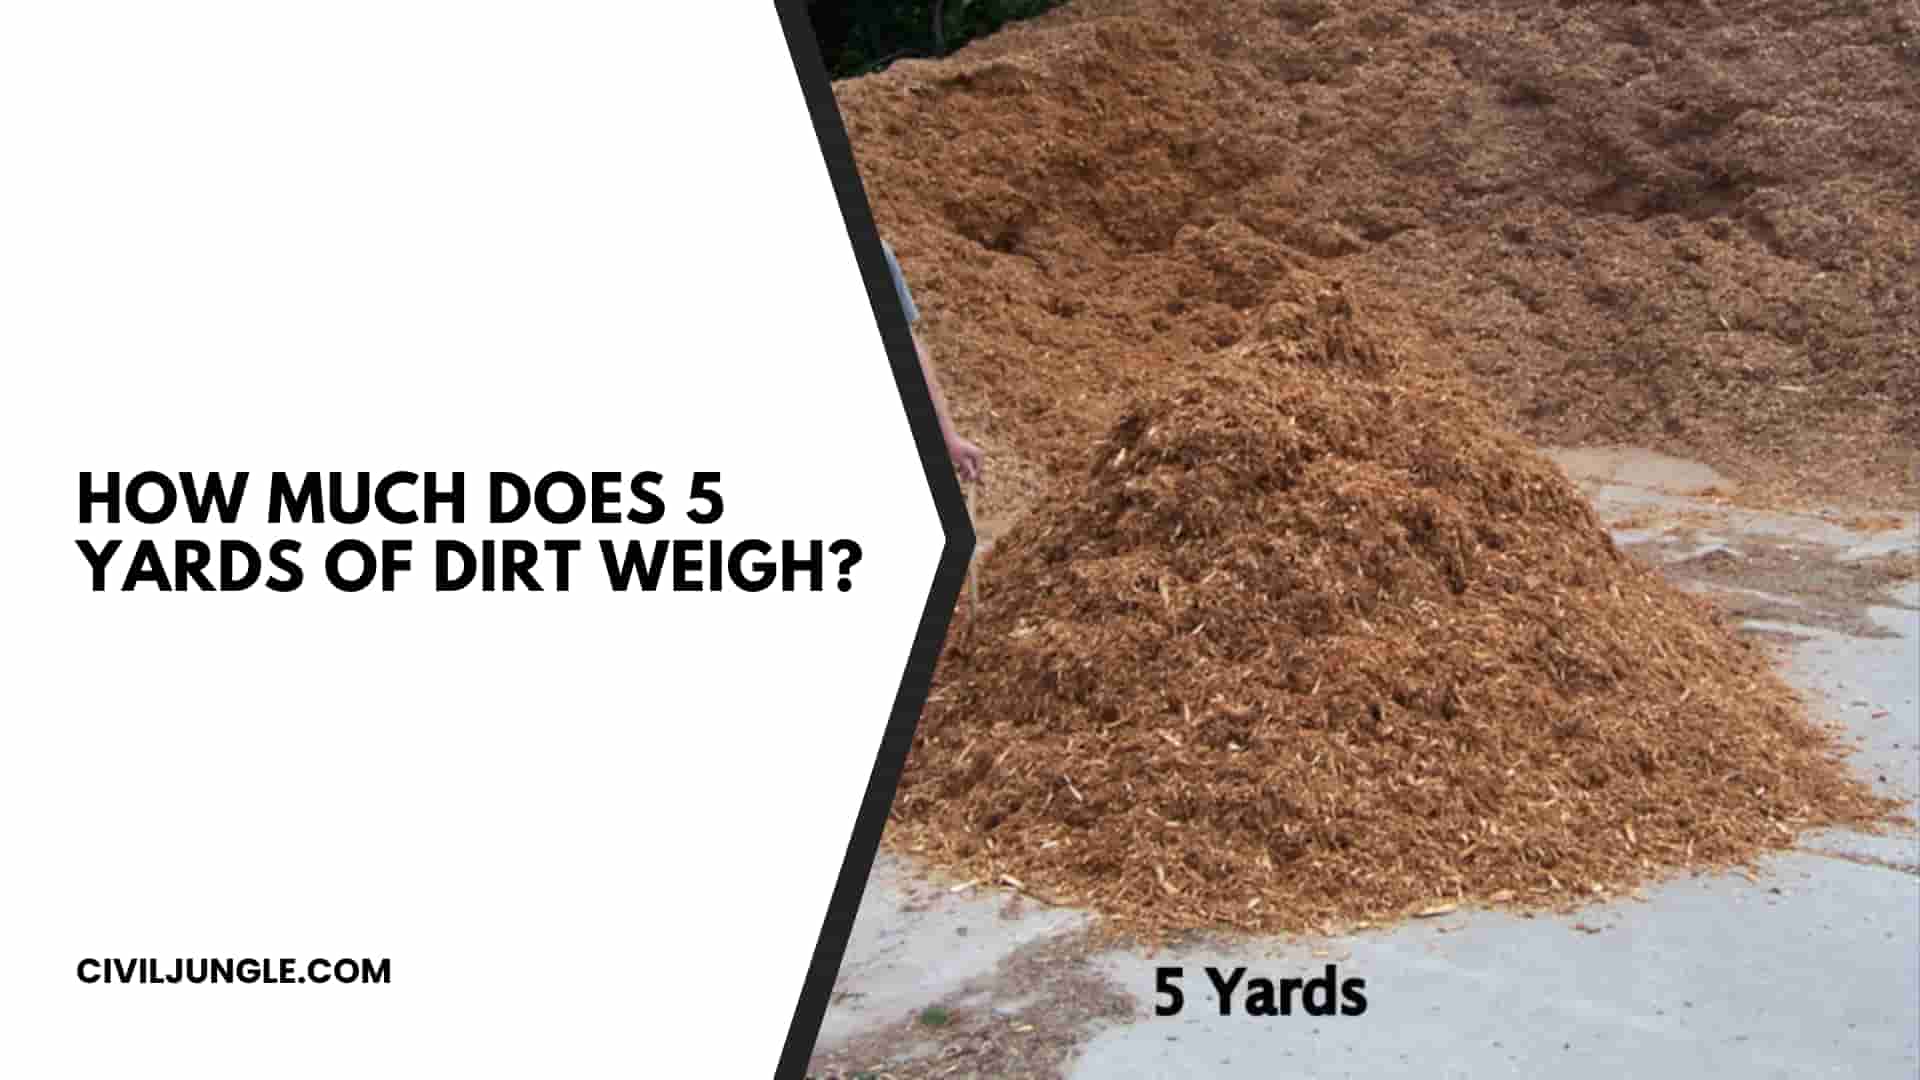 How Much Does 5 Yards of Dirt Weigh?